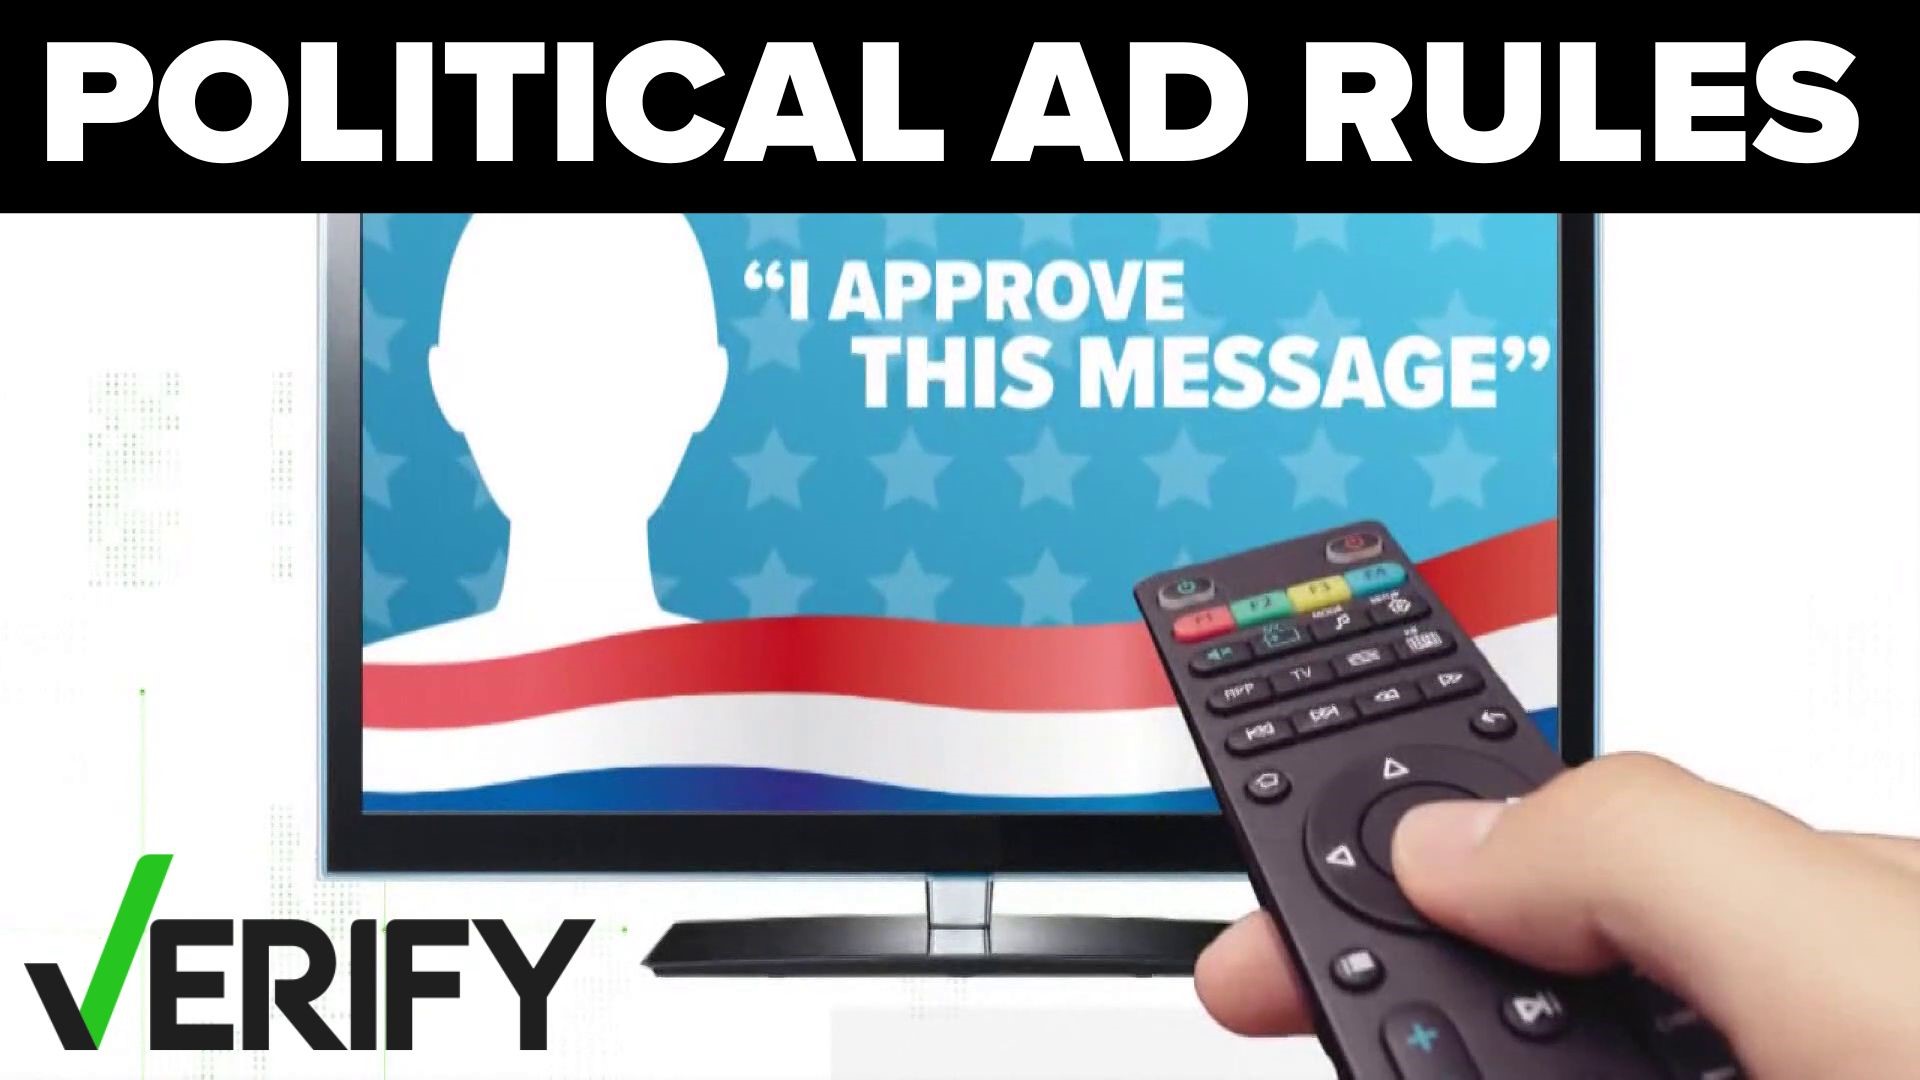 With midterm elections just over a month away, you're going to see a lot more campaign ads on TV. These are the rules candidates must follow for all ads.